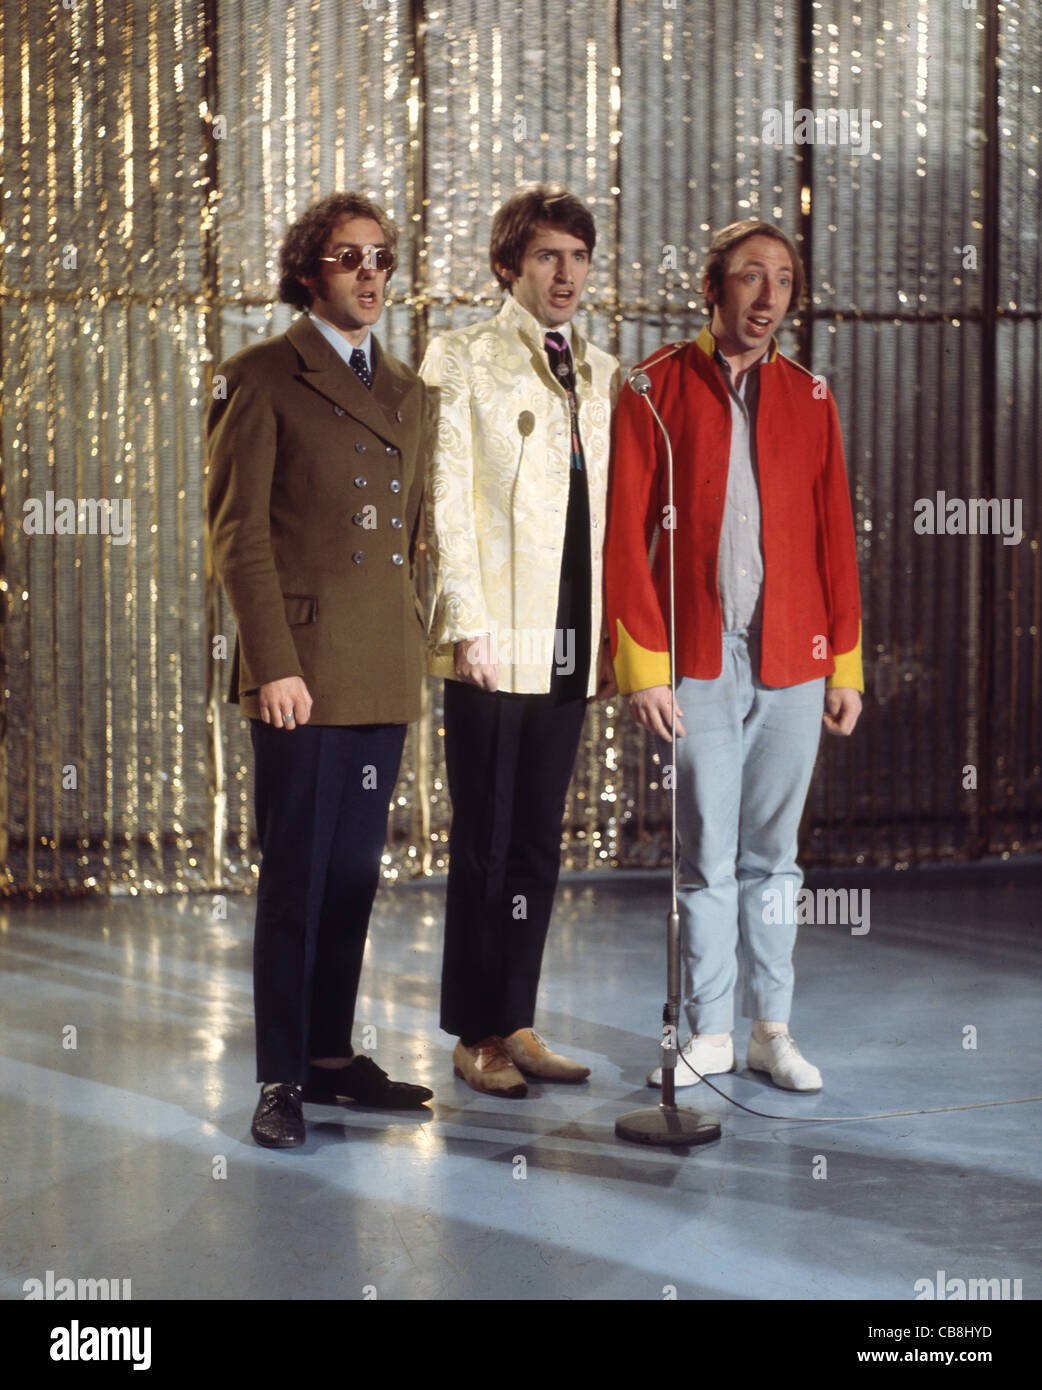 SCAFFOLD UK pop trio in December 1967 from left: John Gorman, Mike McGear and Roger McGough. Photo Tony Gale  Stock Photo